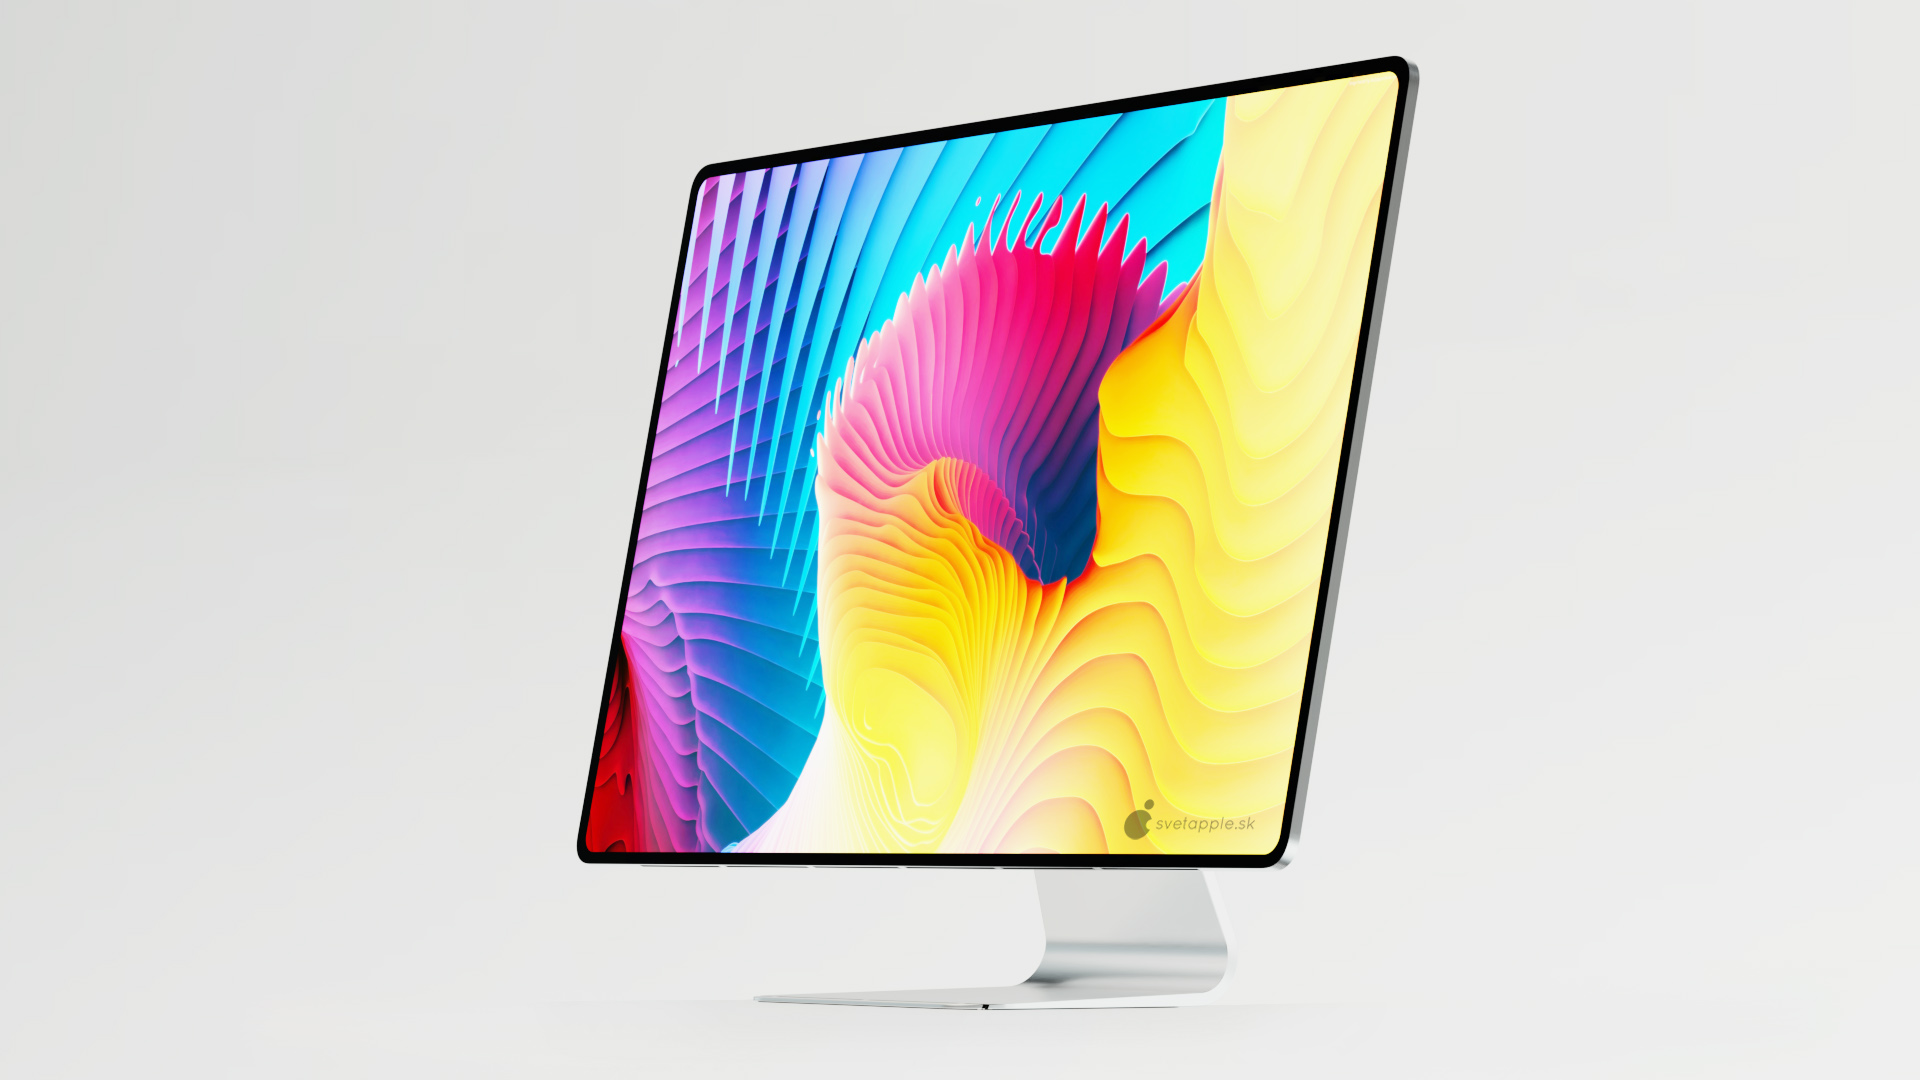 PC/タブレット デスクトップ型PC Concept imagines new 24-inch and 32-inch iMac with edge-to-edge 